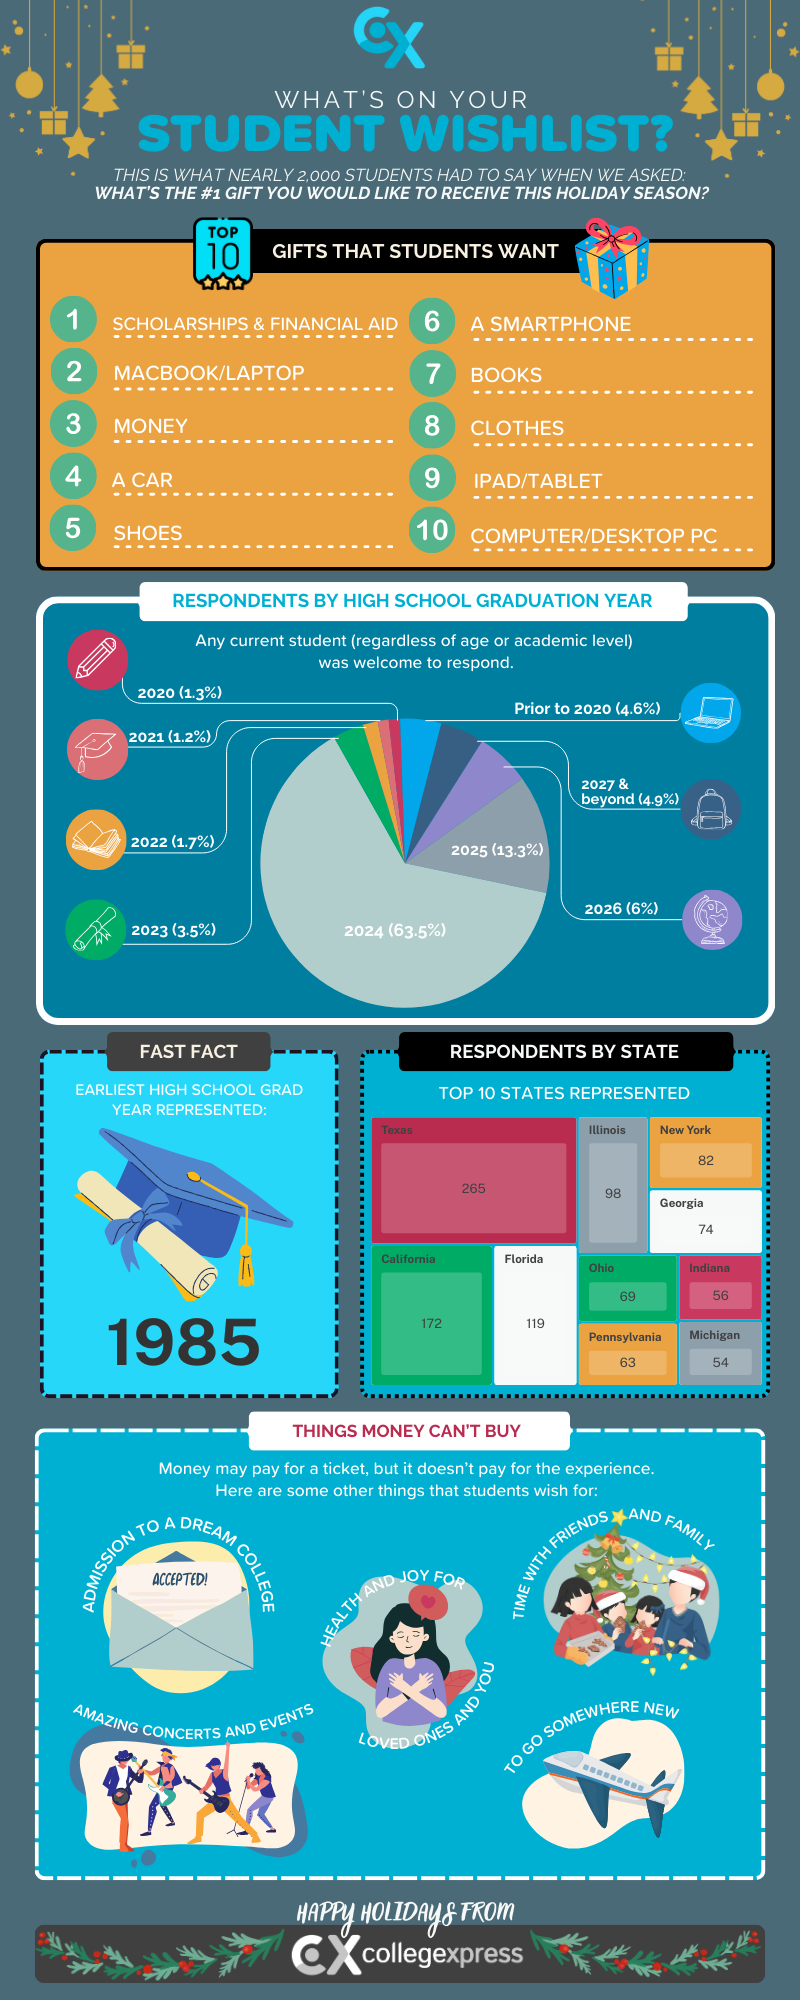 CollegeXpress Wishlist Infographic with student stats